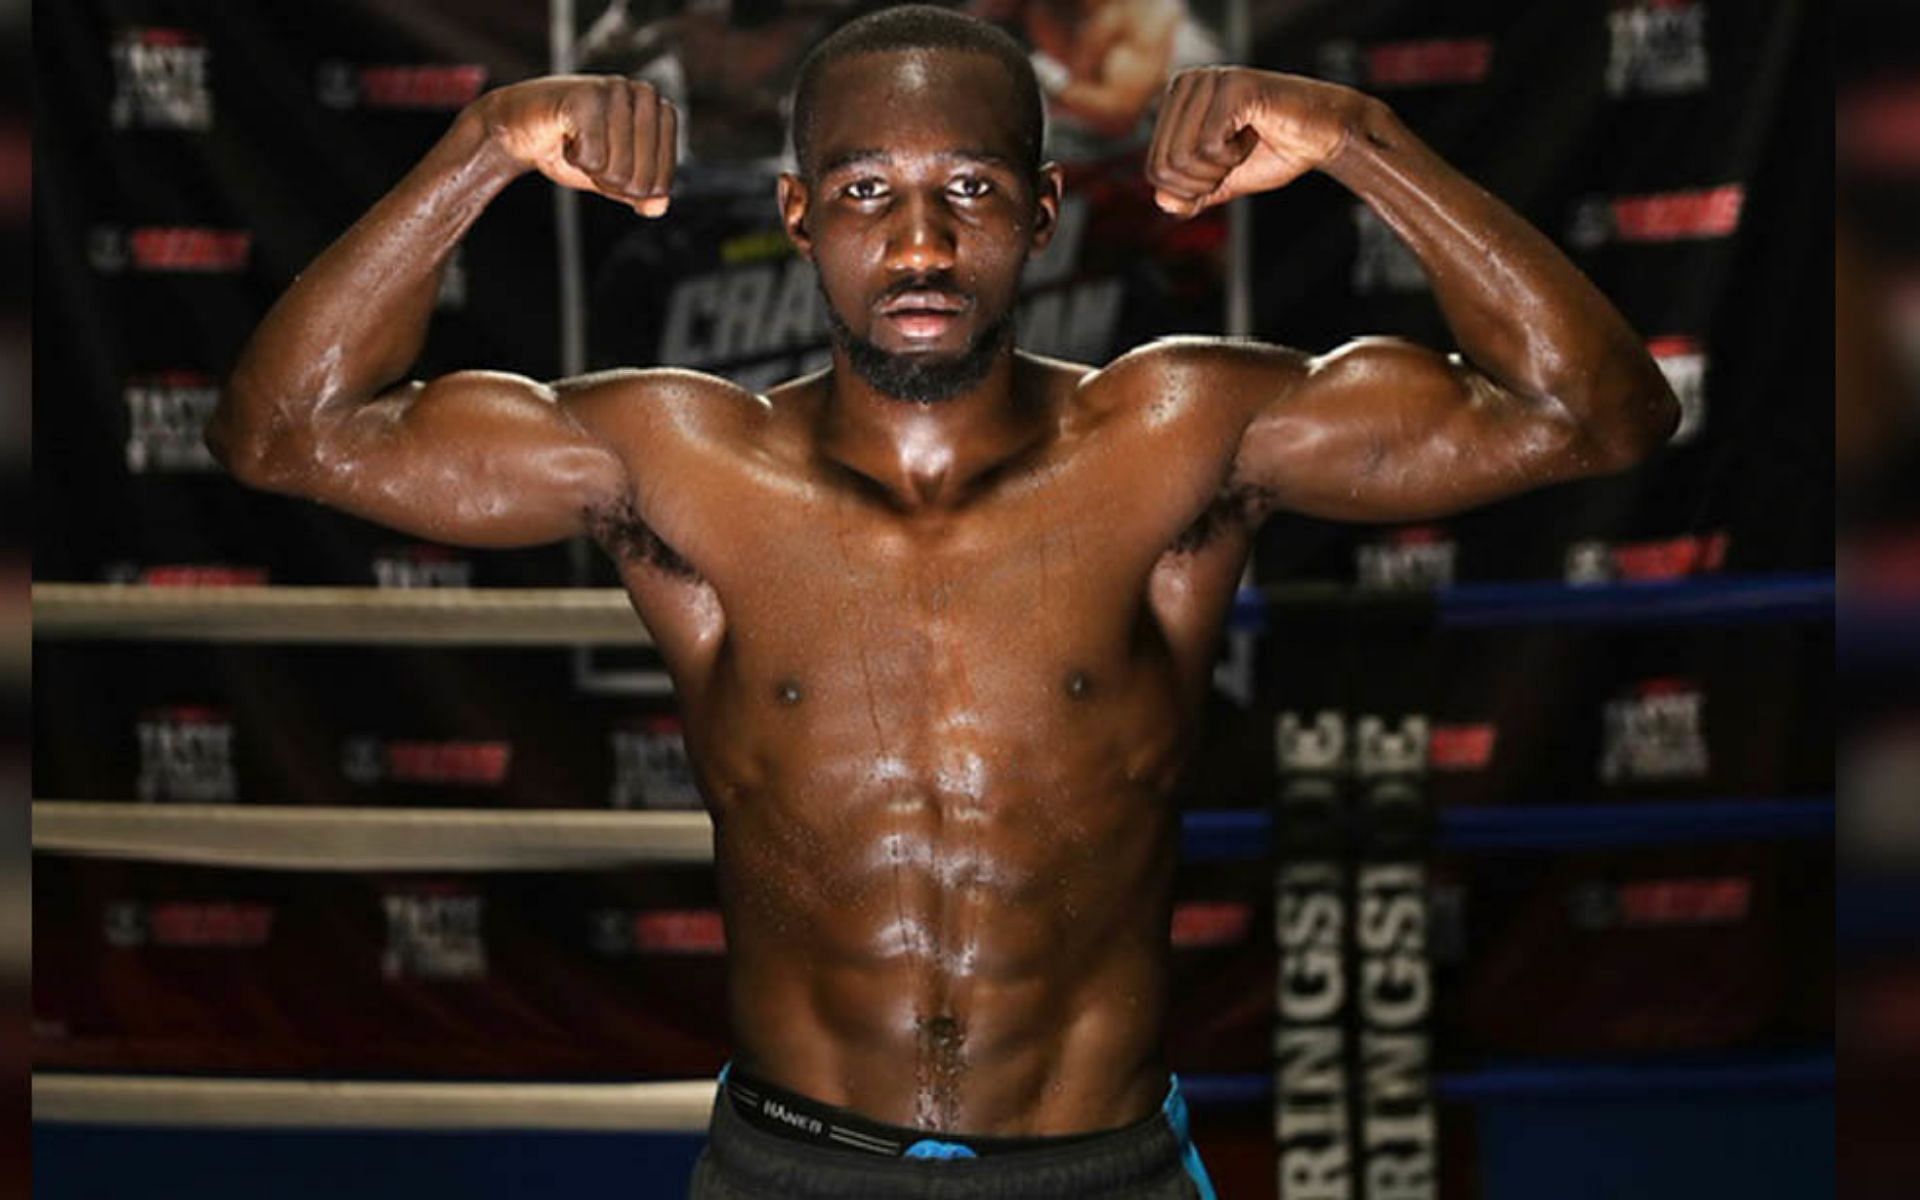 Terence Crawford flexing in the gym